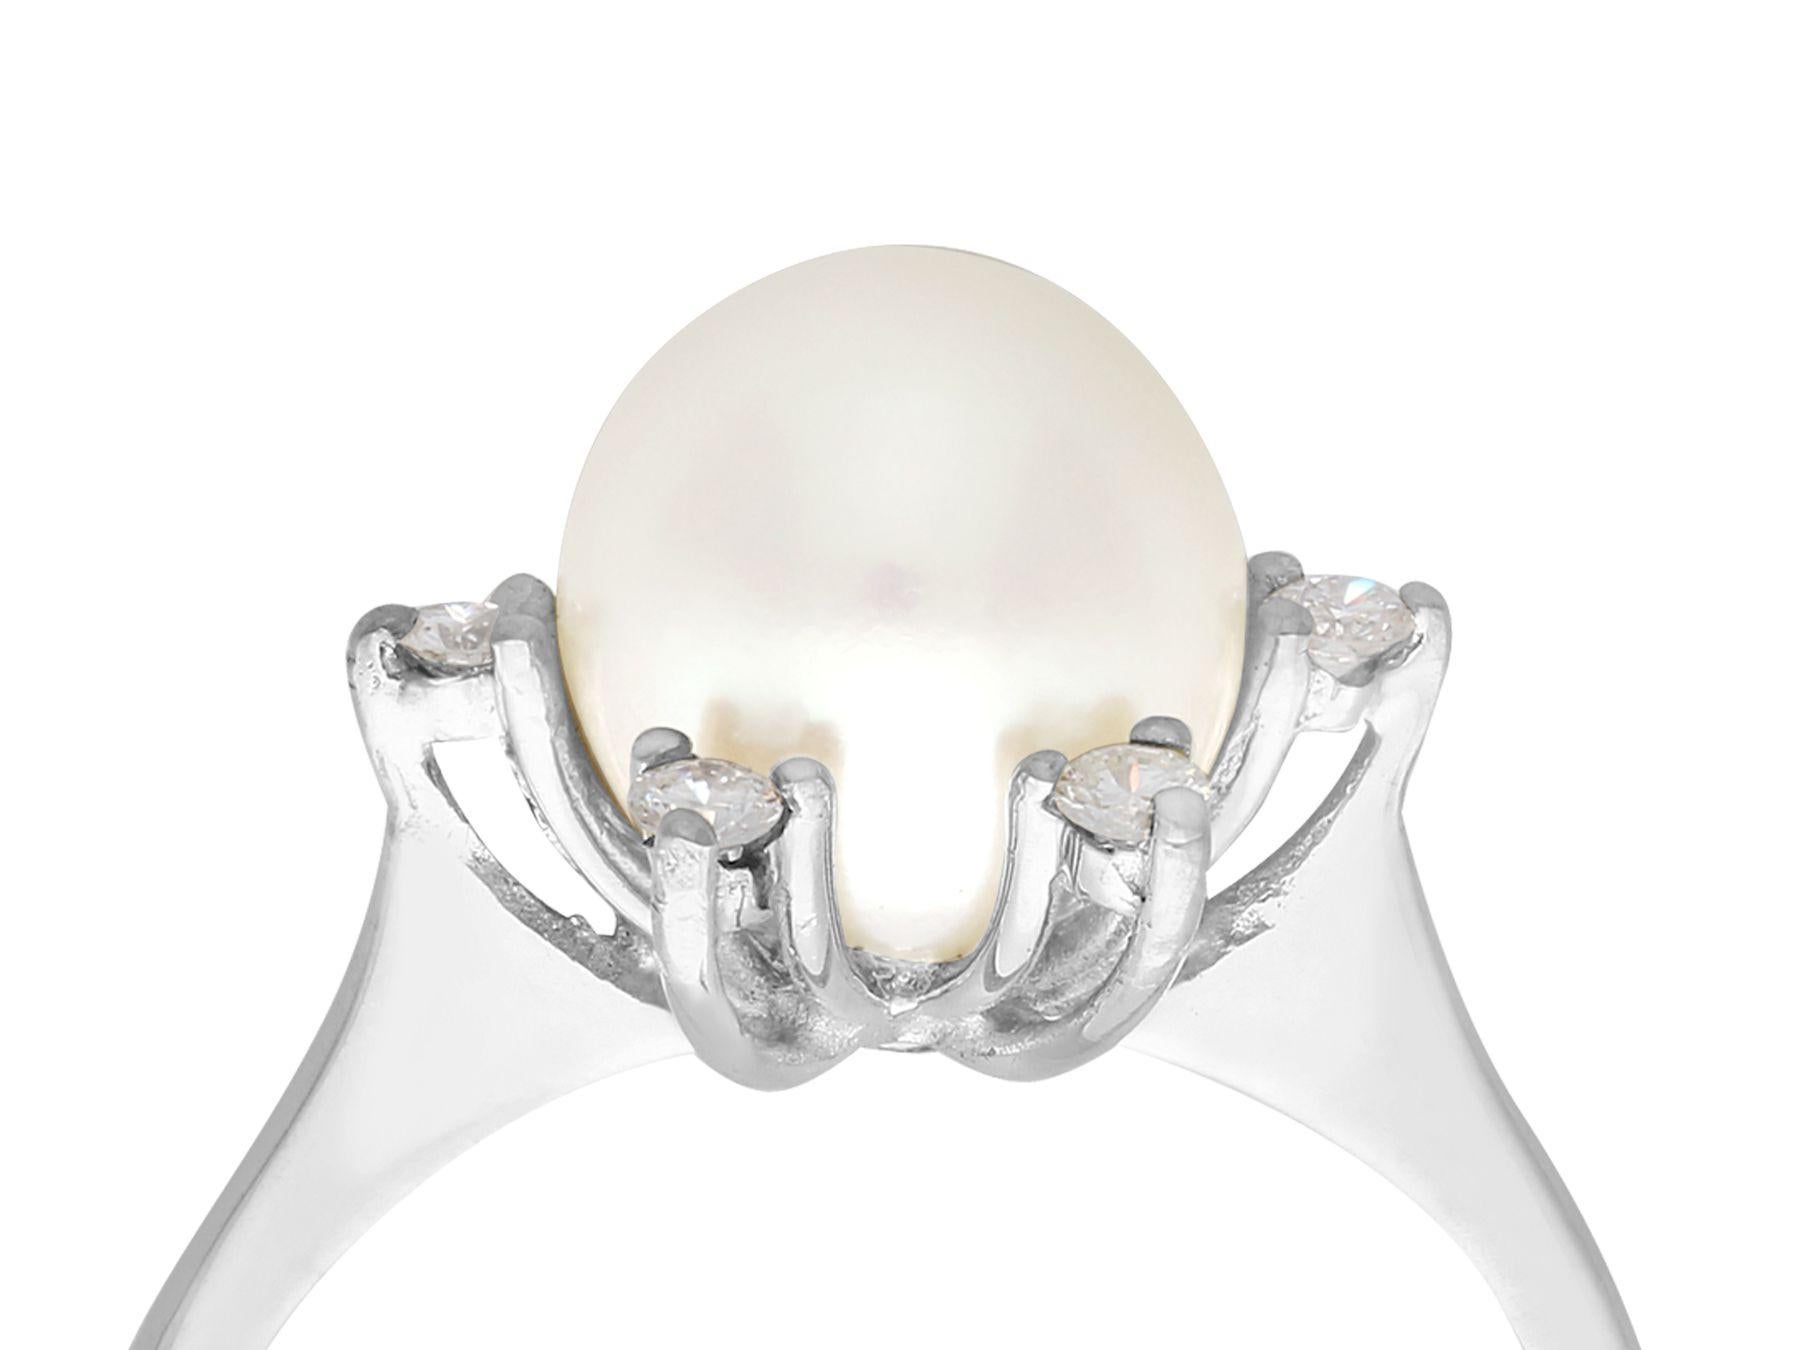 A fine and impressive antique cultured pearl and 0.18 carat diamond, 18k white gold dress ring; part of our antique jewelry and estate jewelry collections.

This fine and impressive cultured pearl dress ring has been crafted in 18k white gold.

The